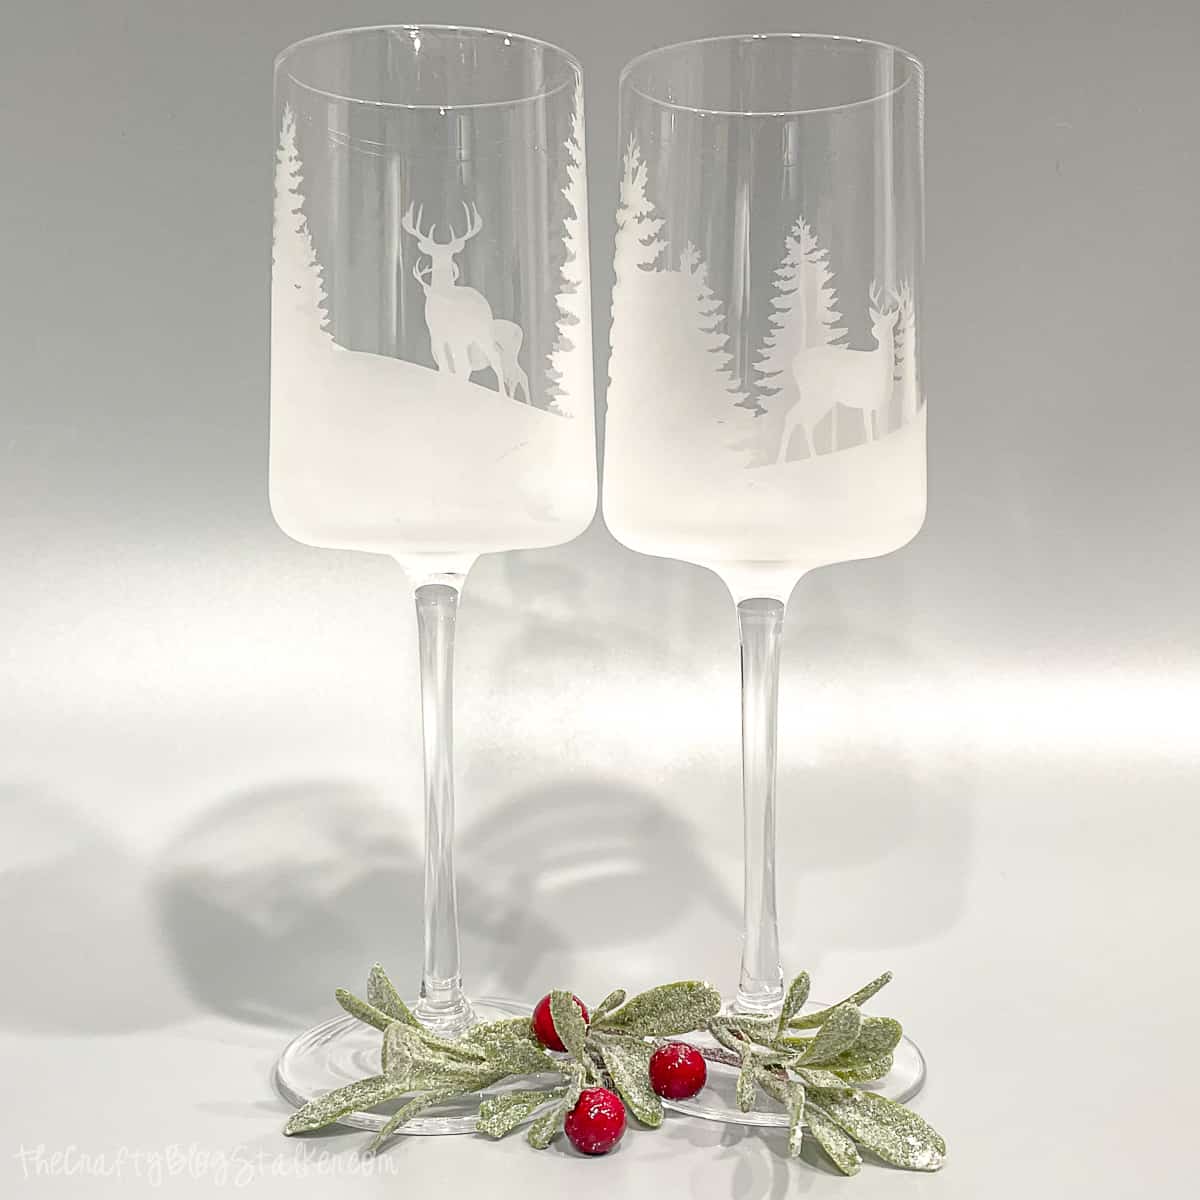 How to Etch Wine Glasses with Etchall Creme - Crafty Blog Stalker